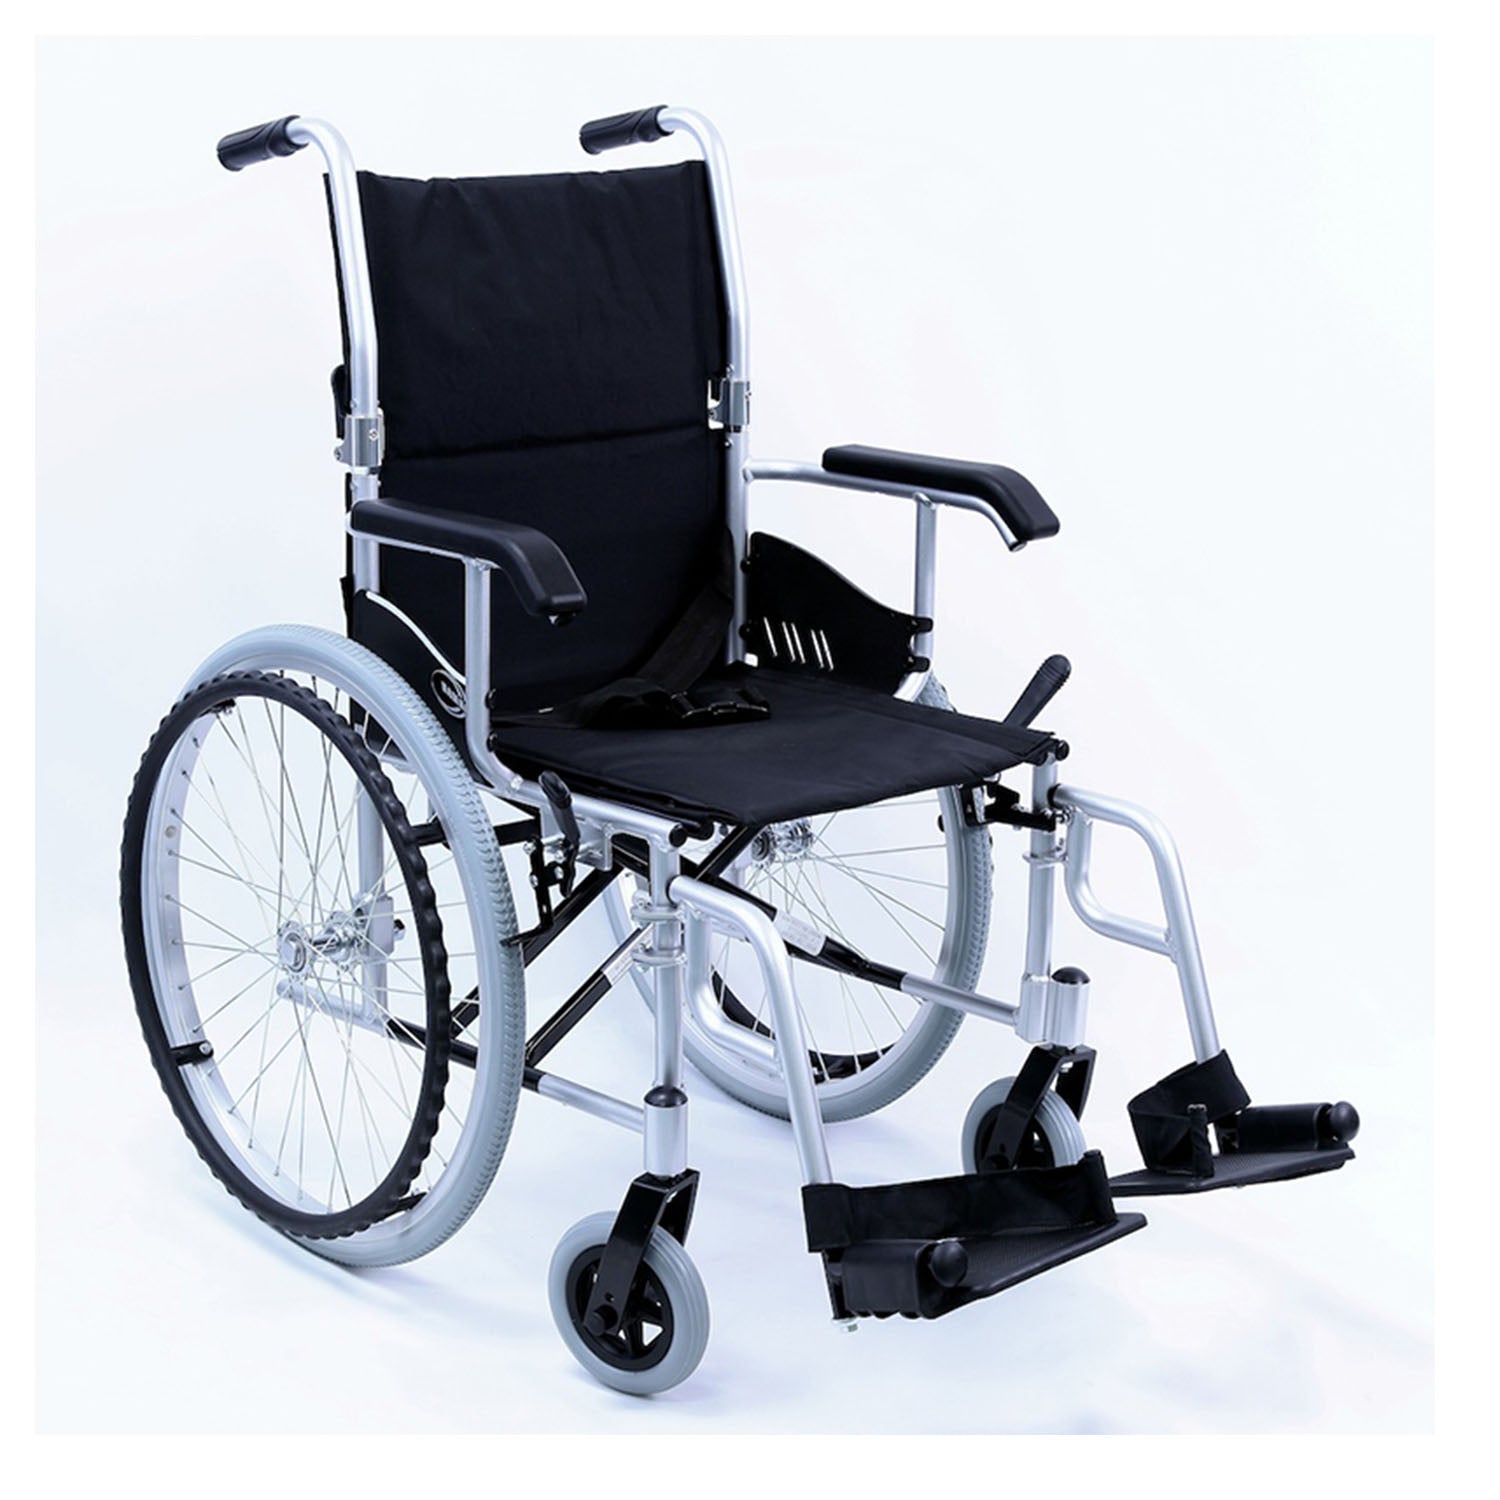 Karman LT-980 18 inch Seat 24 lbs. Ultra Lightweight Wheelchair with Swing Away Footrest in Silver